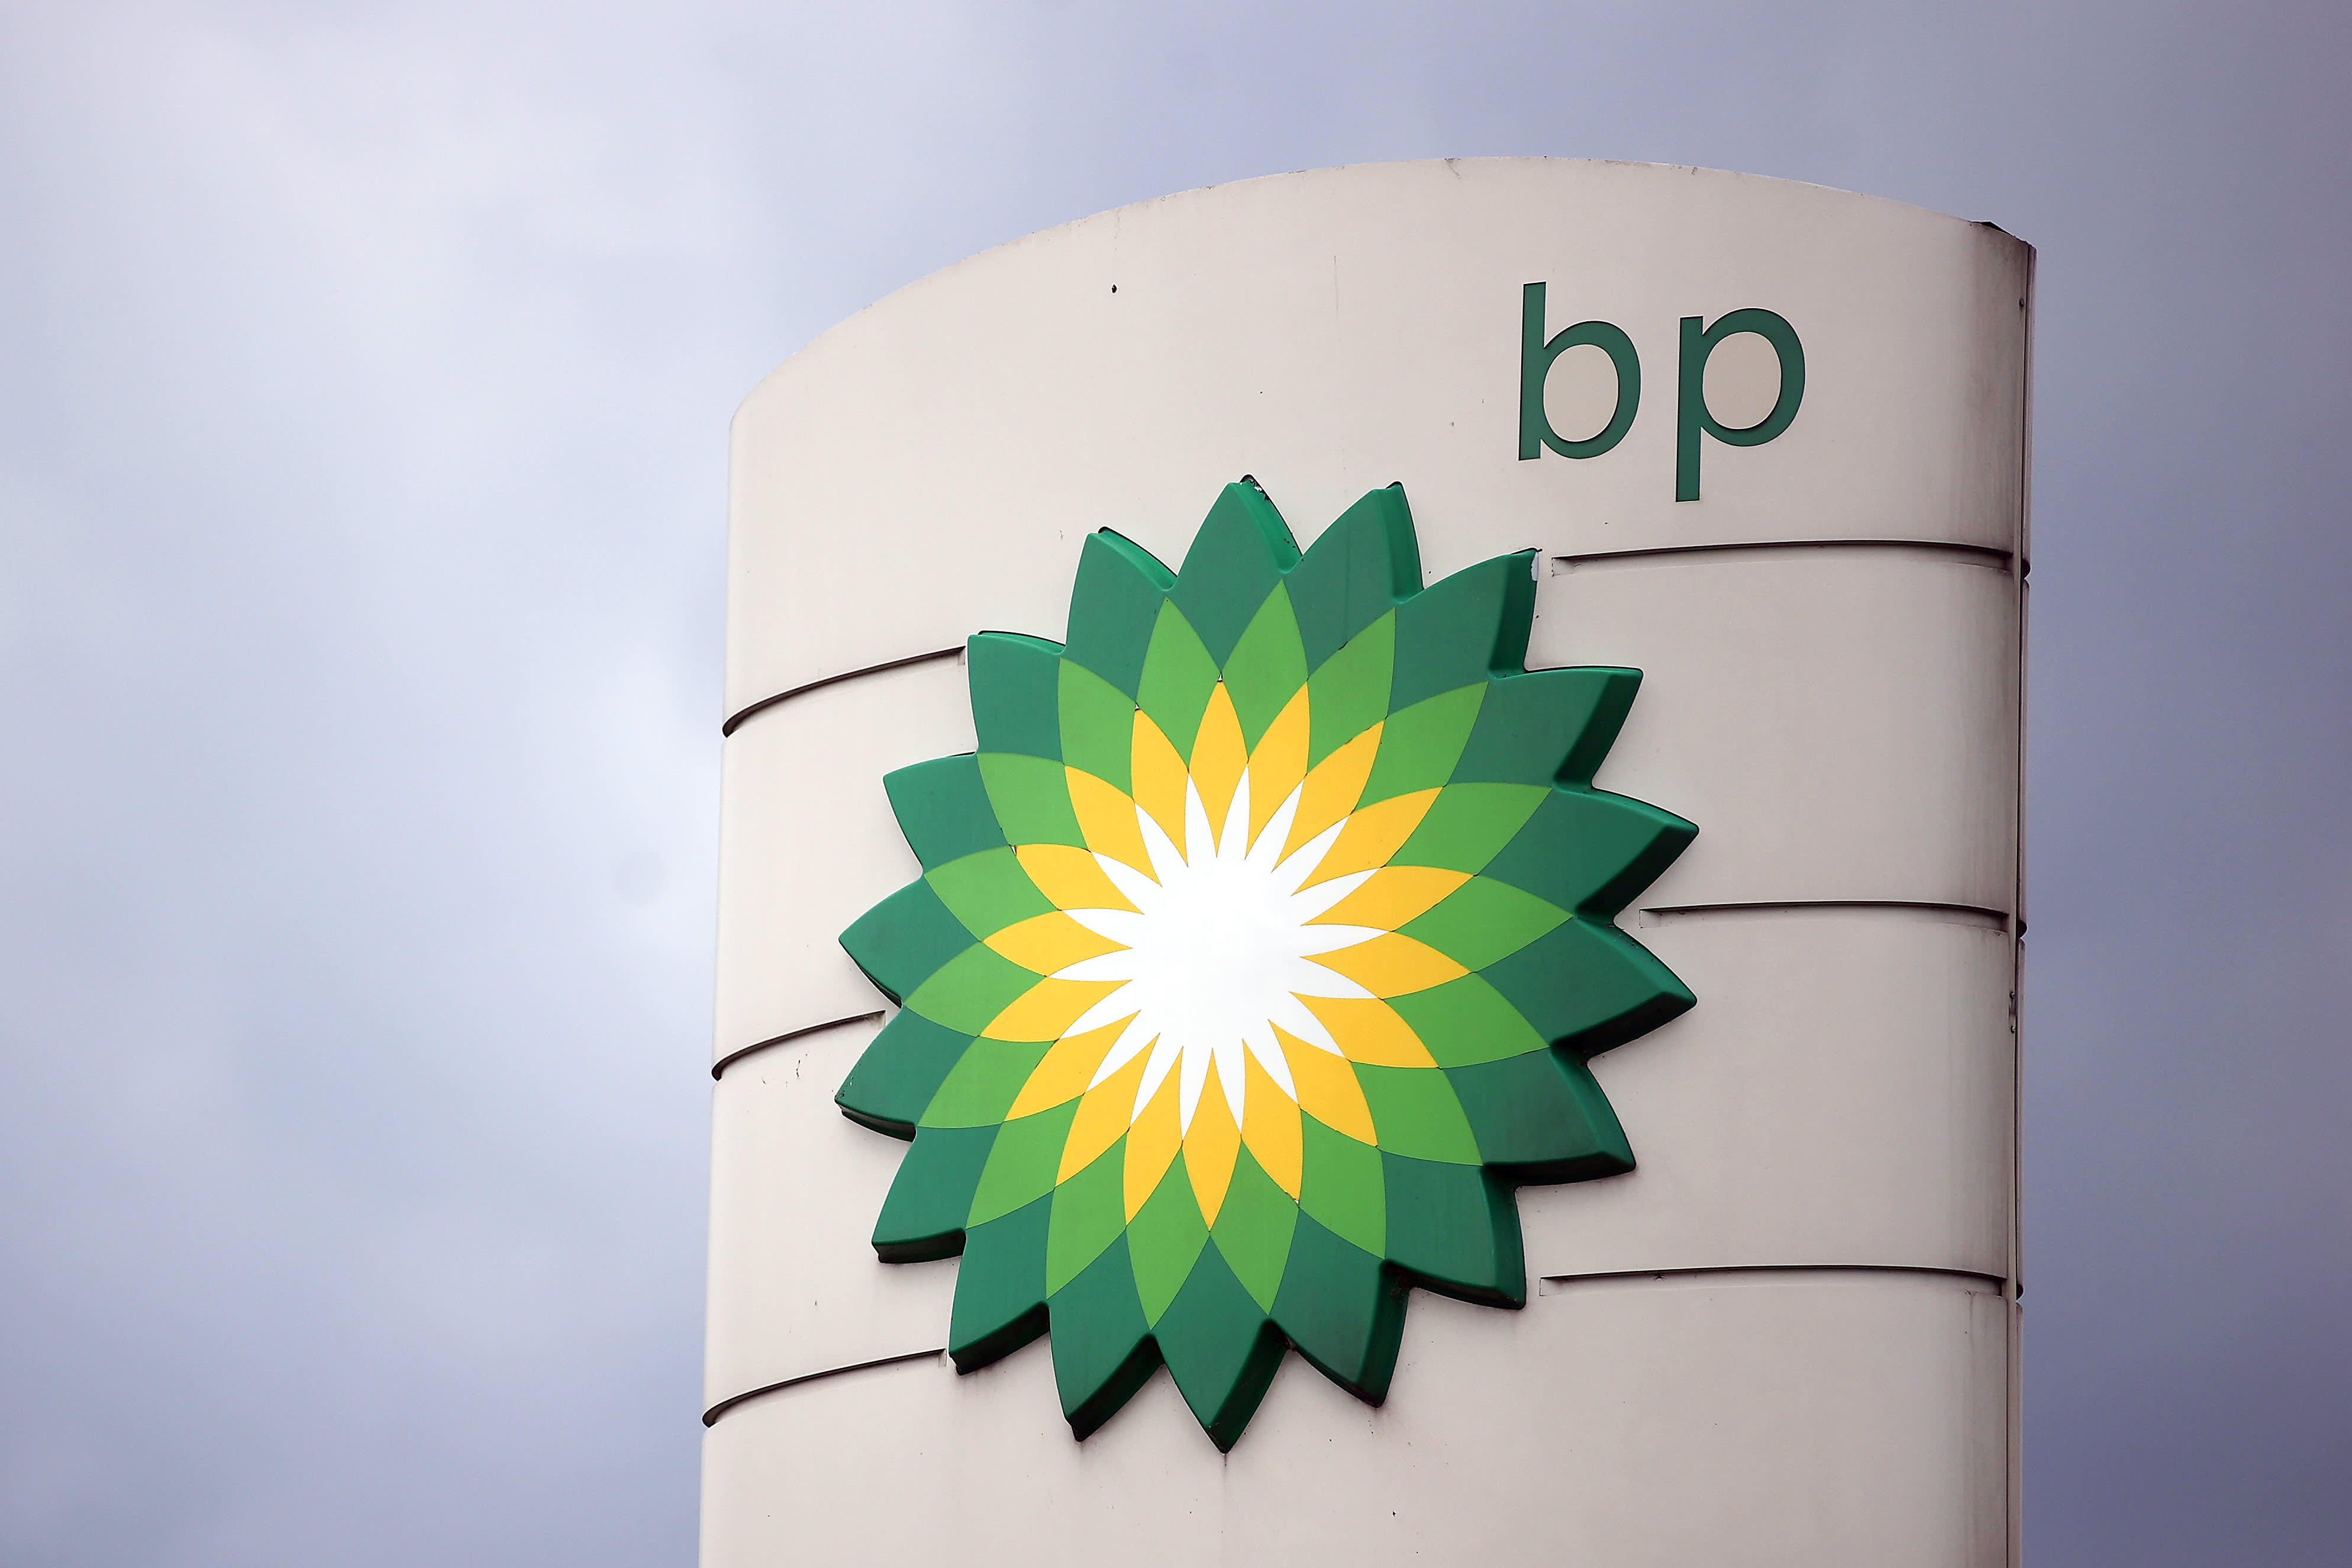 Oil giant BP is a buy as fundamentals remain strong, Citi says in upgrade